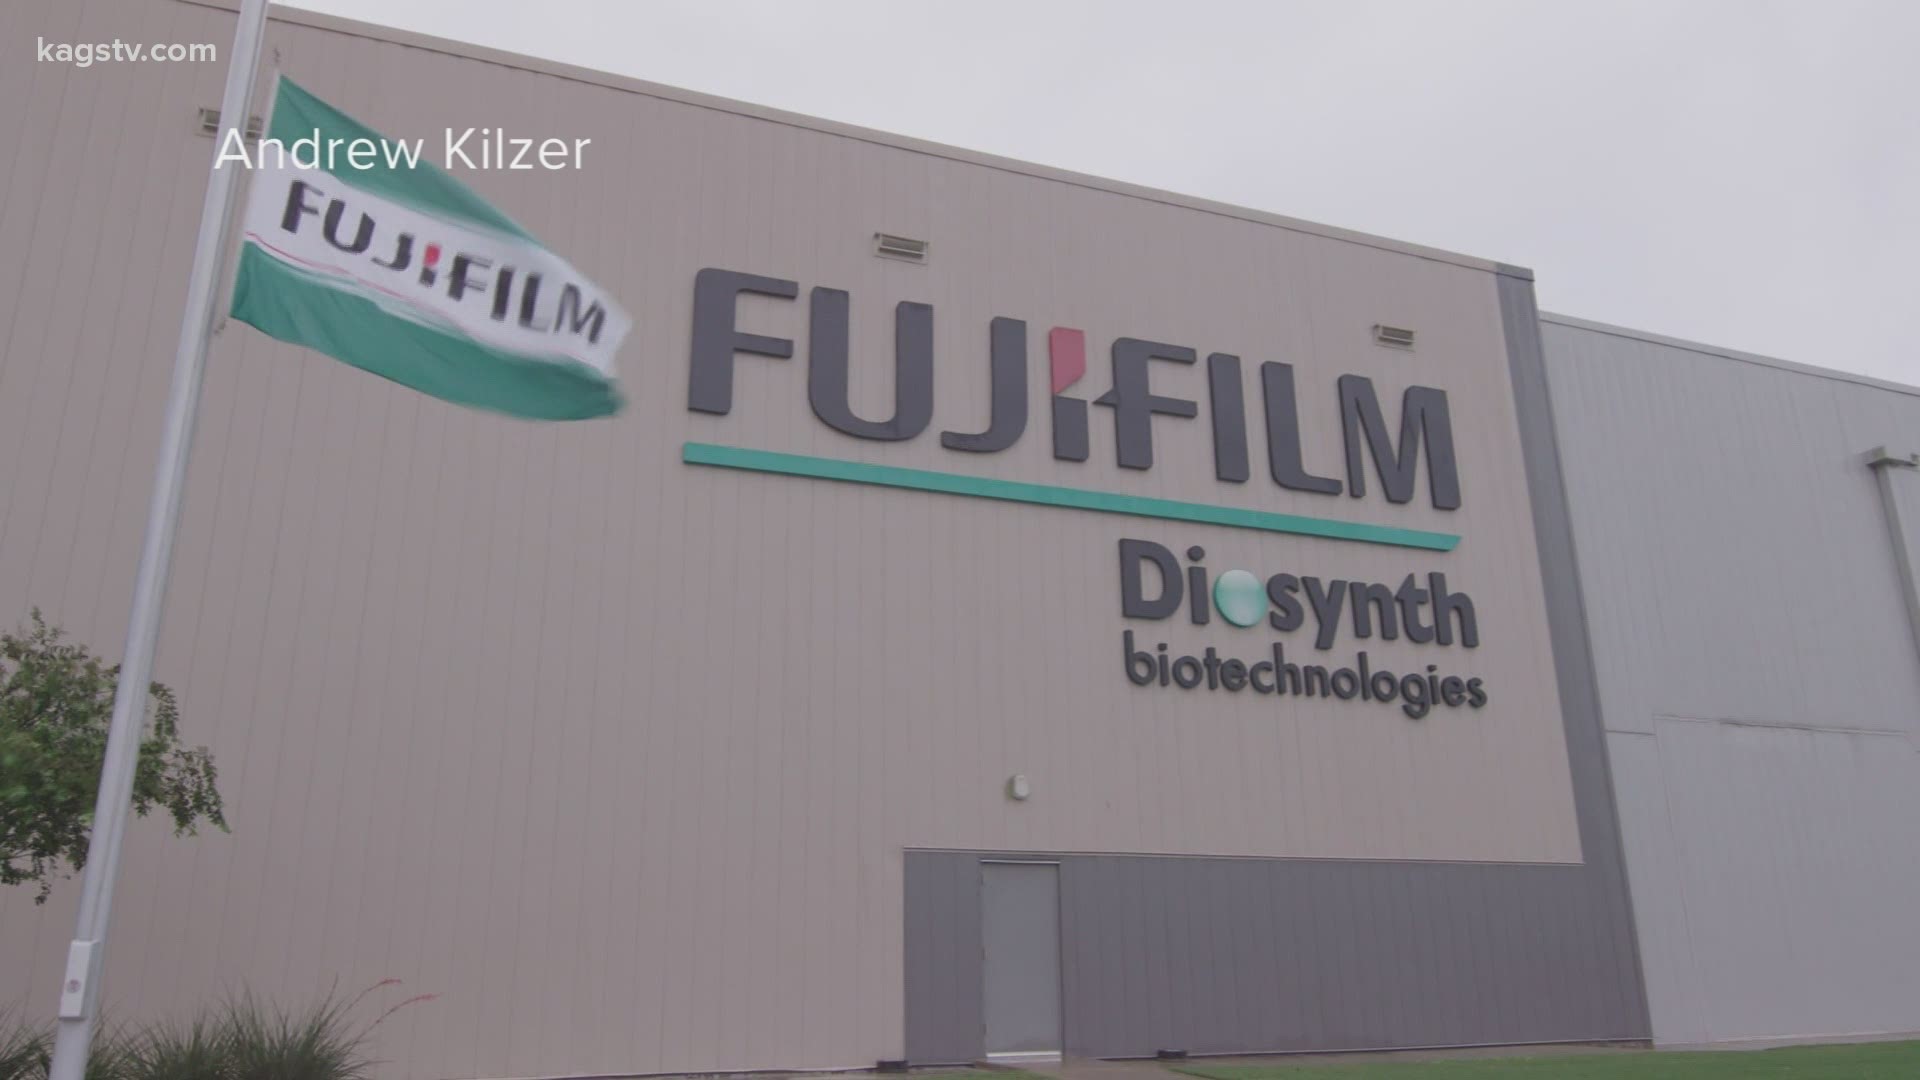 The Brazos Valley Economic Development Corporation submitted Fujifilm Diosynth Biotechnologies' expansion project for the award.